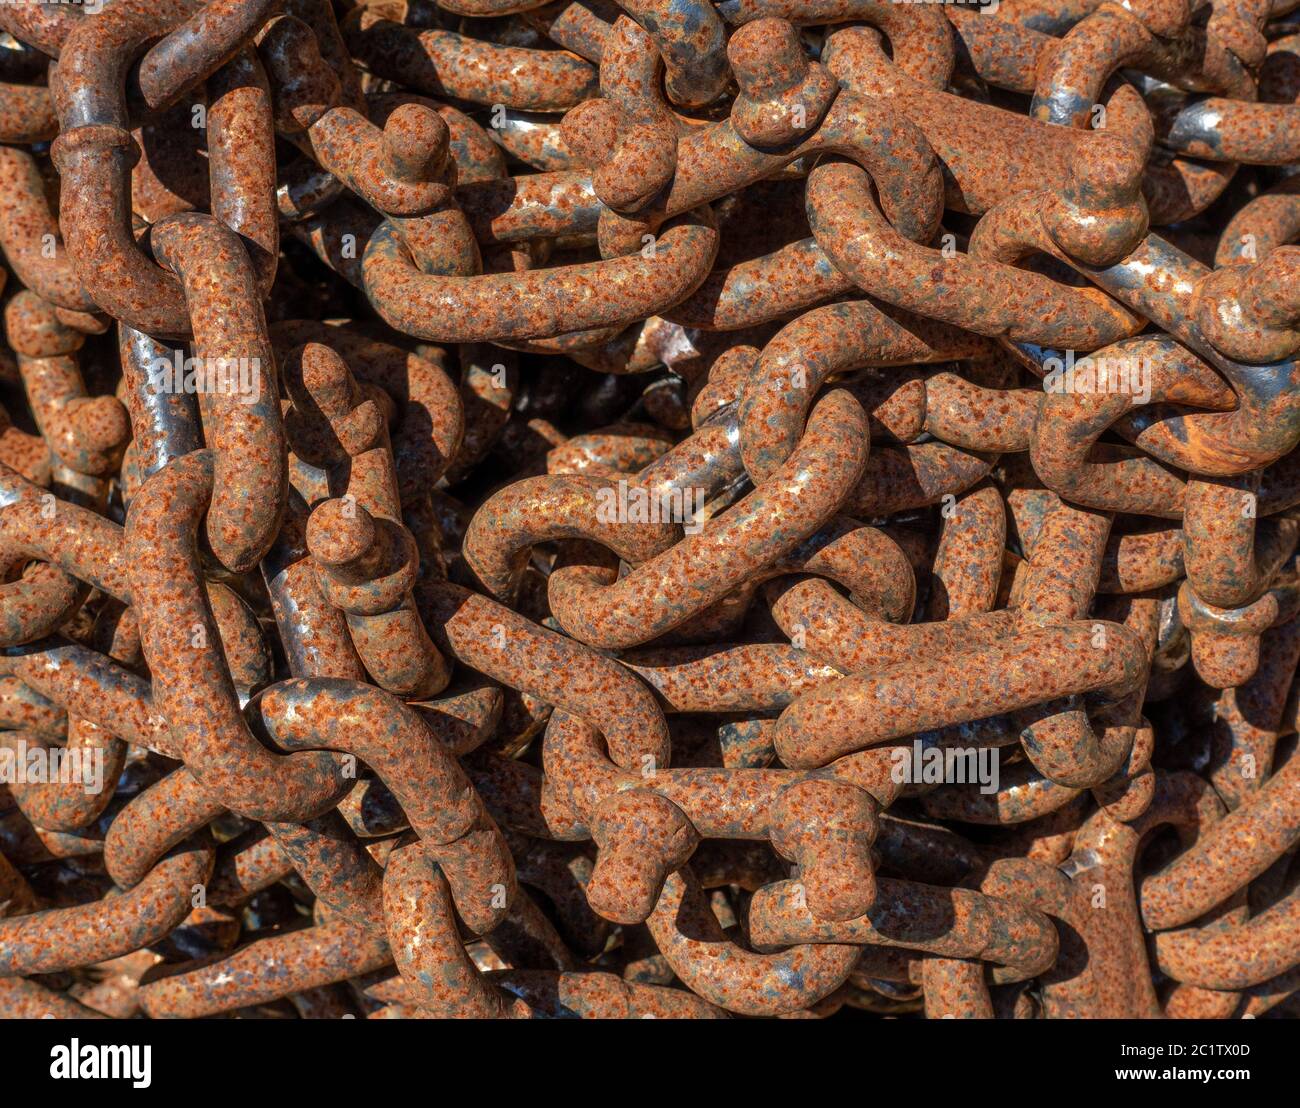 Rusty industrial chain with strong links in closeup lies disordered on top of each other in the sunshine Stock Photo